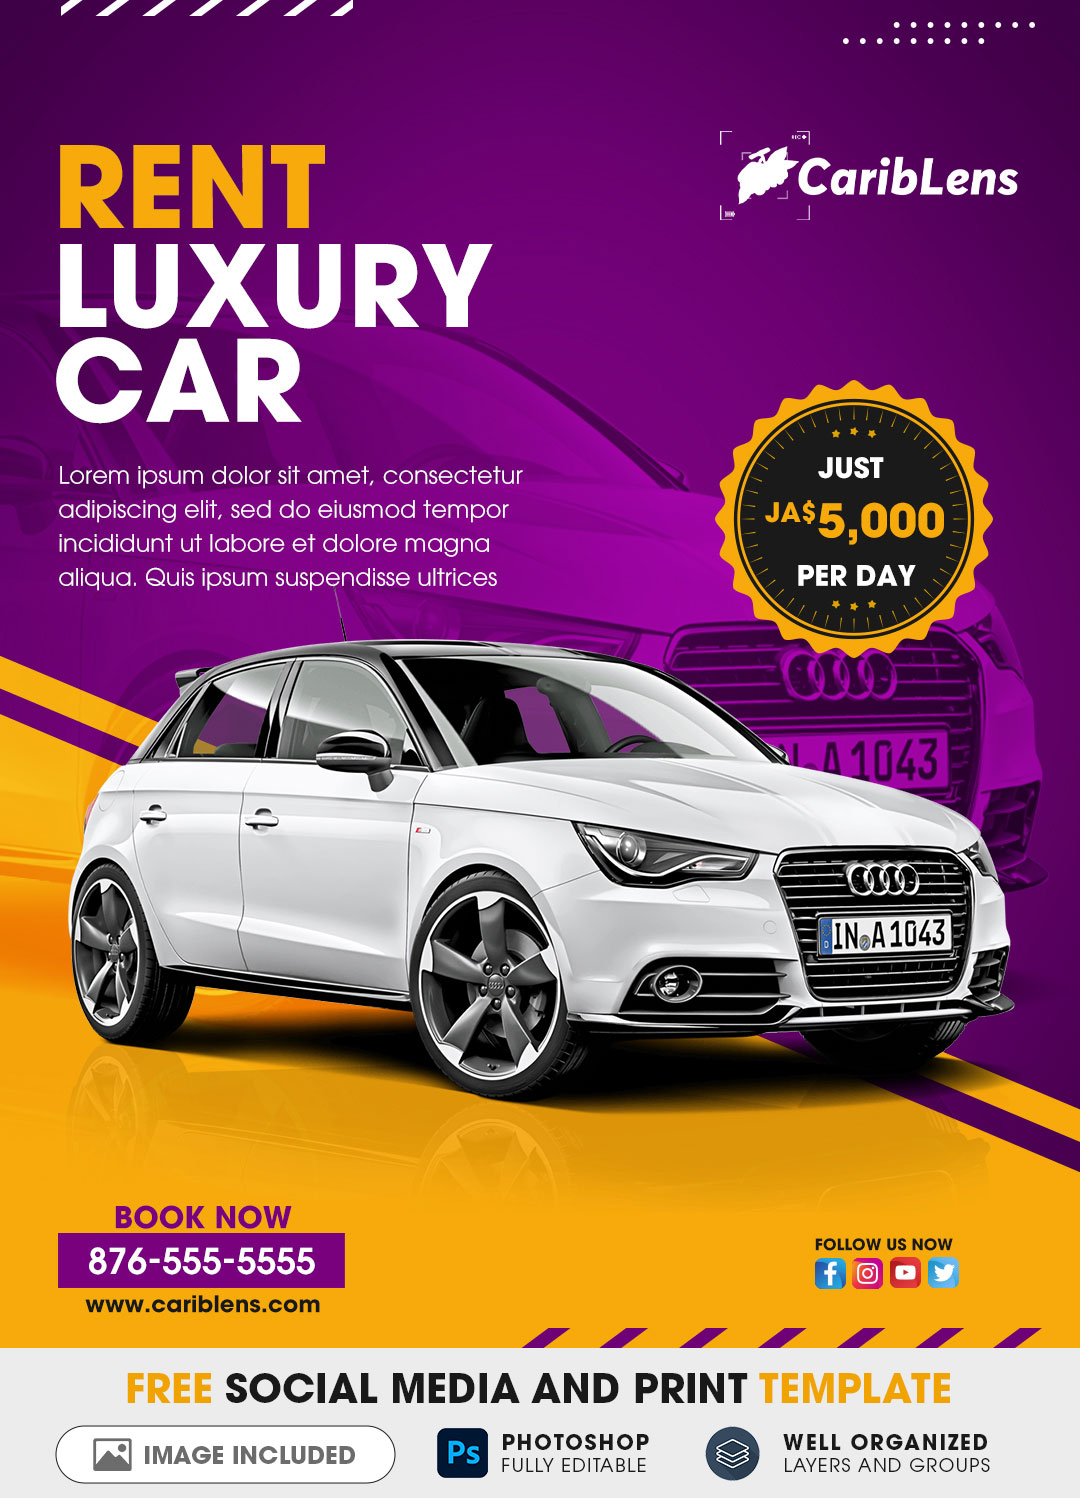 Luxury Car Rental Flyer Or Poster Social Media Template Free Download Copy